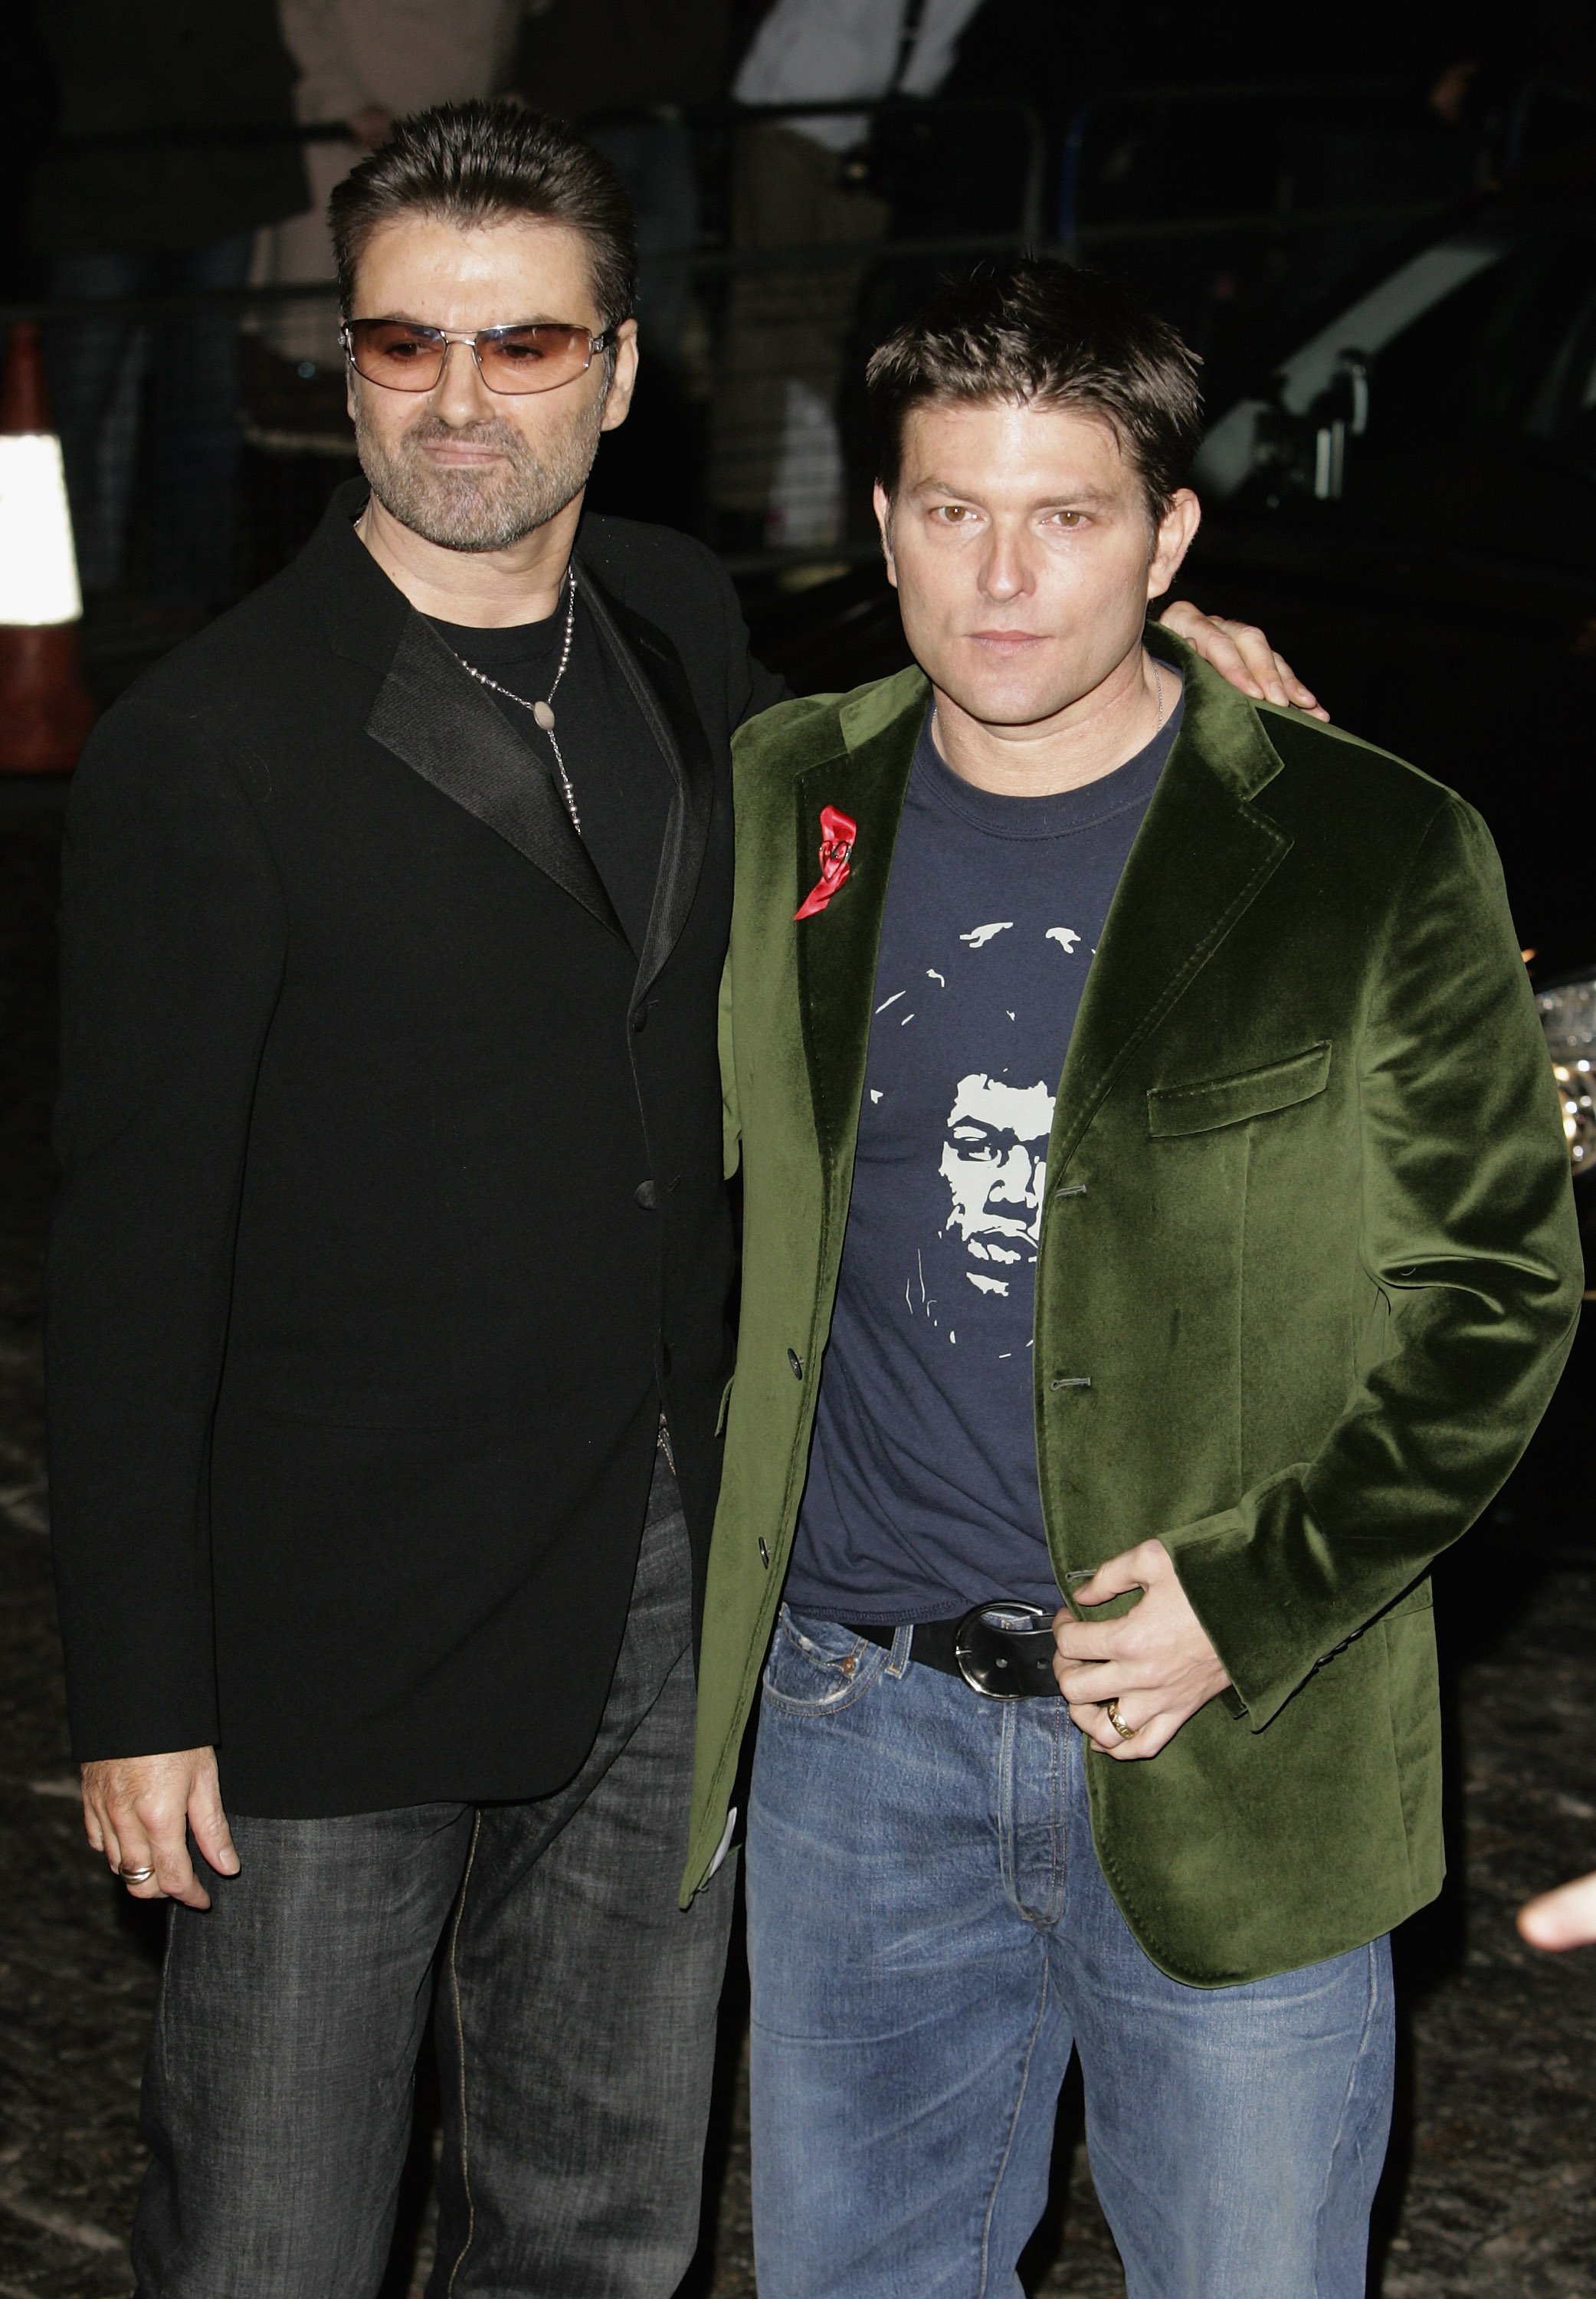 George Michael and Kenny Goss attending the screening of "A Different Story", at the Curzon Mayfair on December 5, 2005 in London, England.  | Source: Getty Images